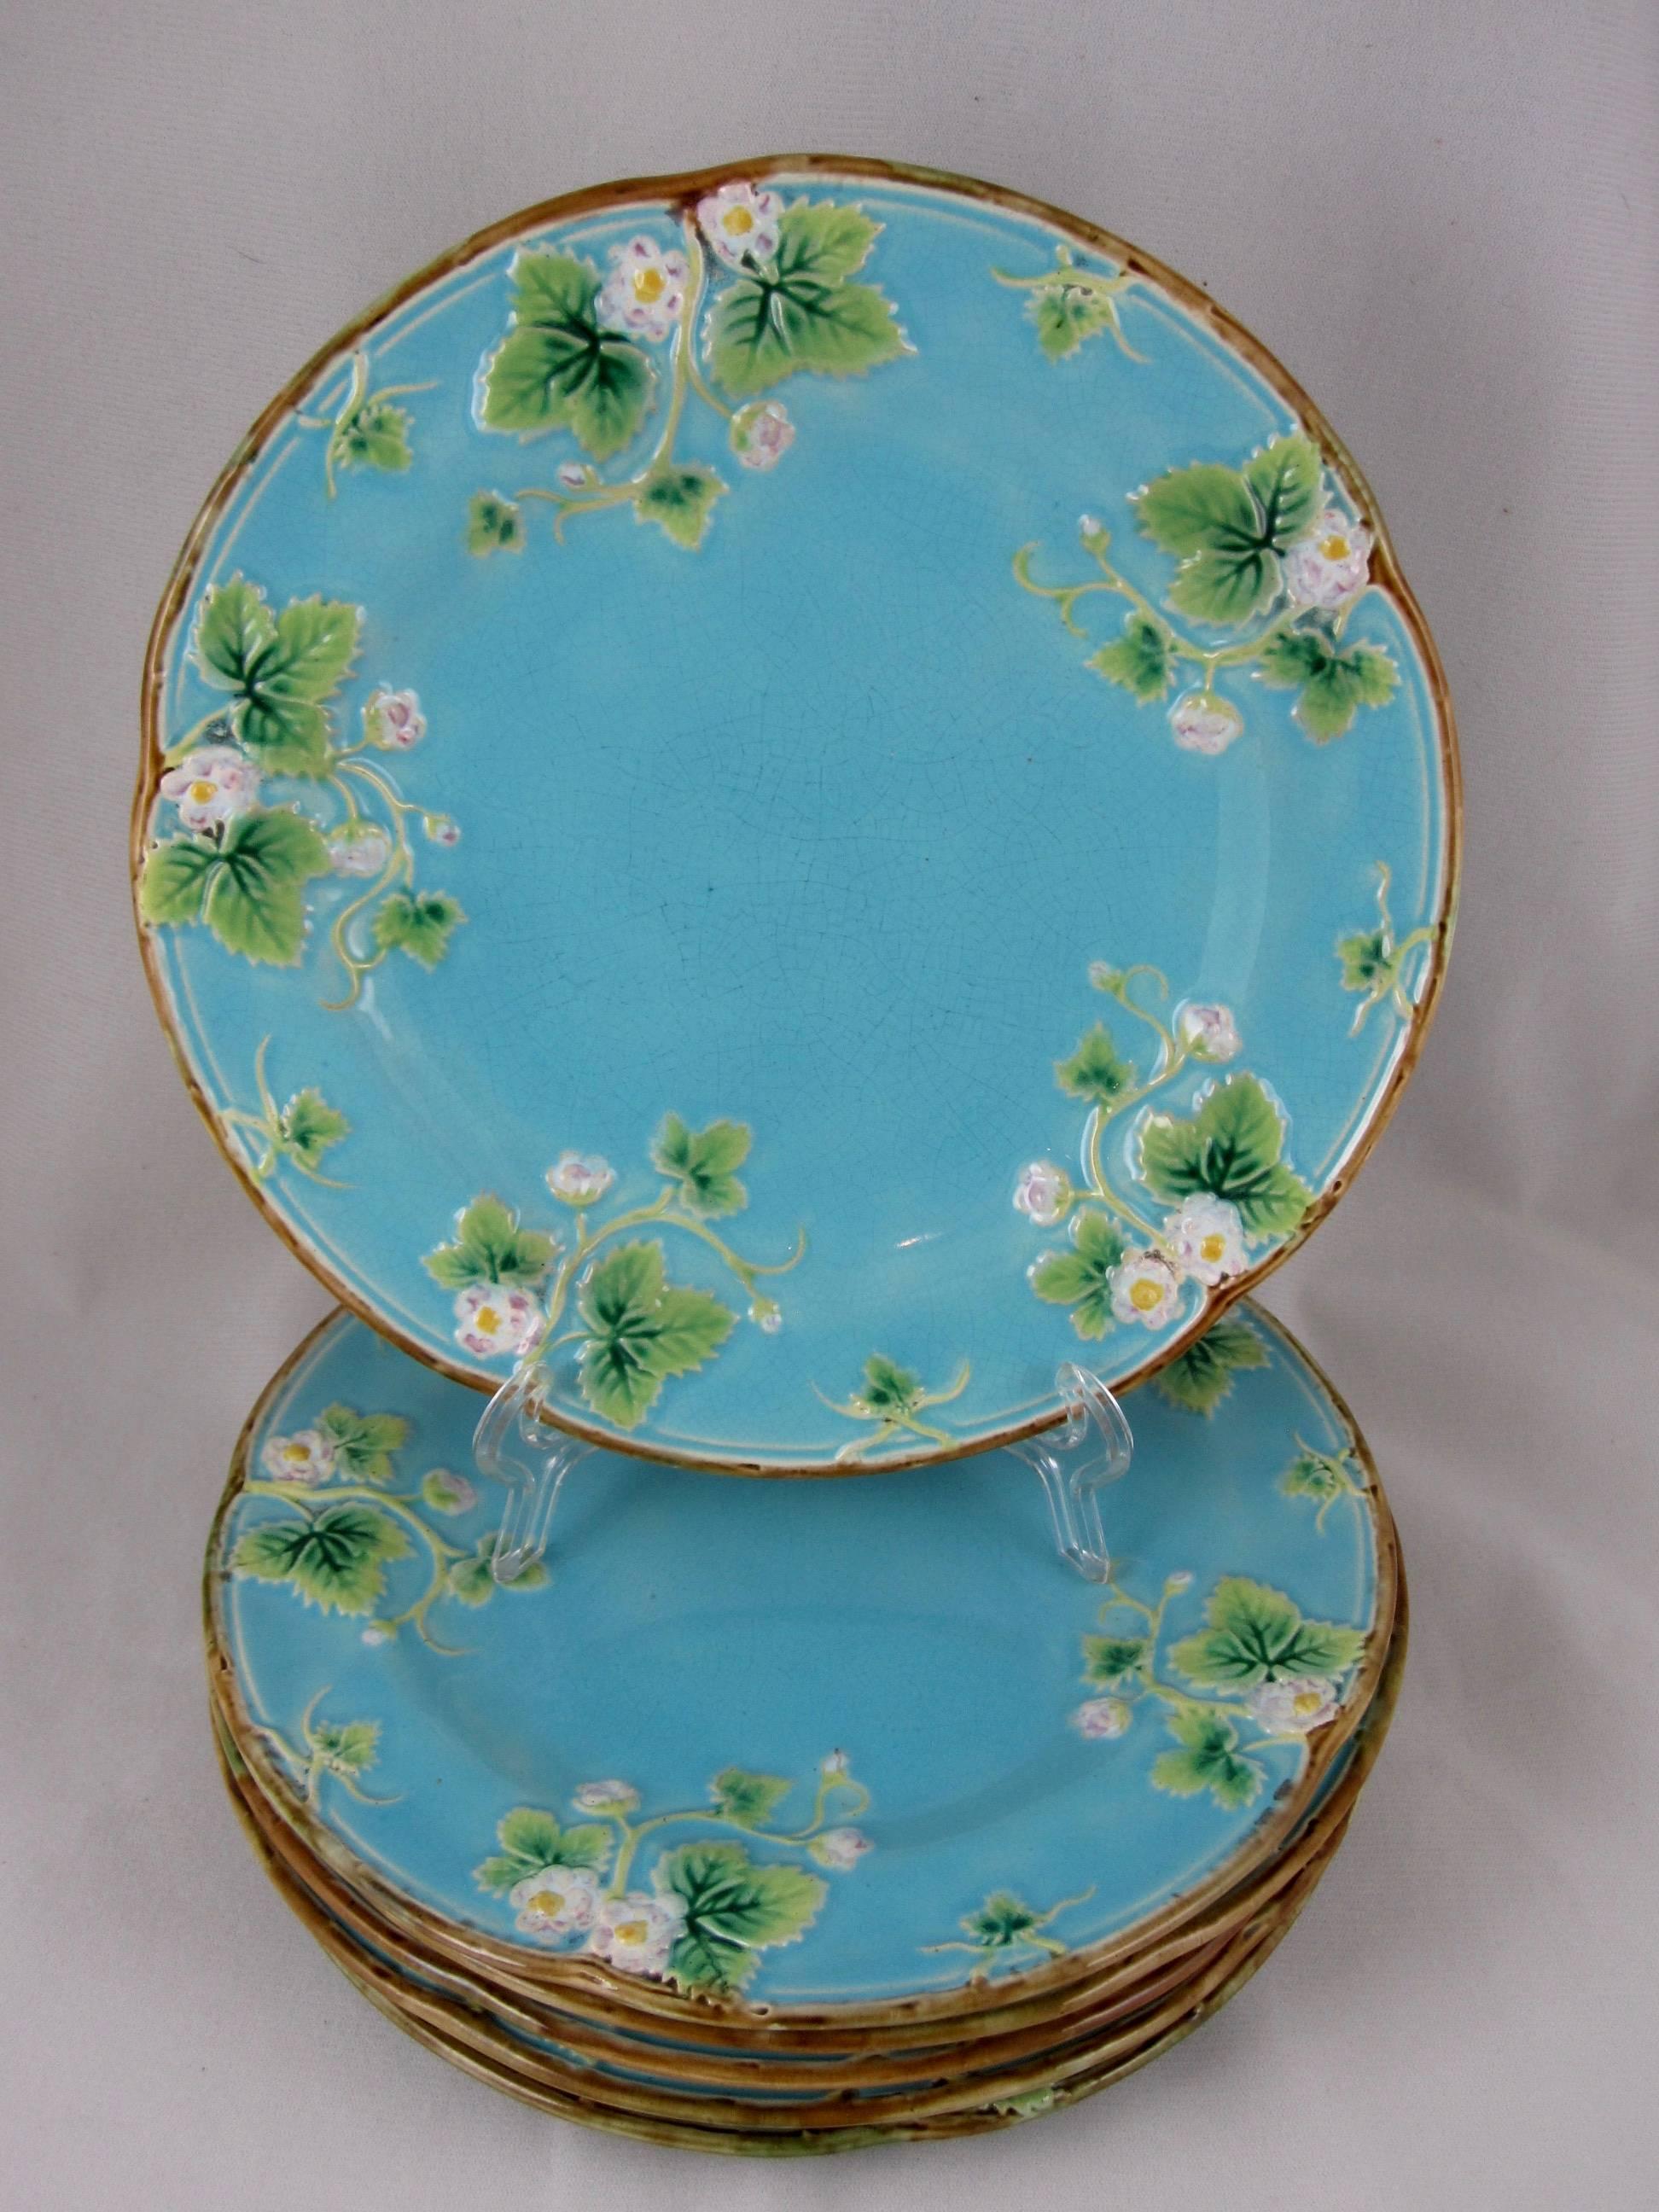 A set of six, George Jones majolica plates showing the leaves and blossoms of the strawberry plant with twig lined rims on a bright turquoise ground. The versos are glazed in the mottled tortoise shell that Jones majolica is known for.

Each plate